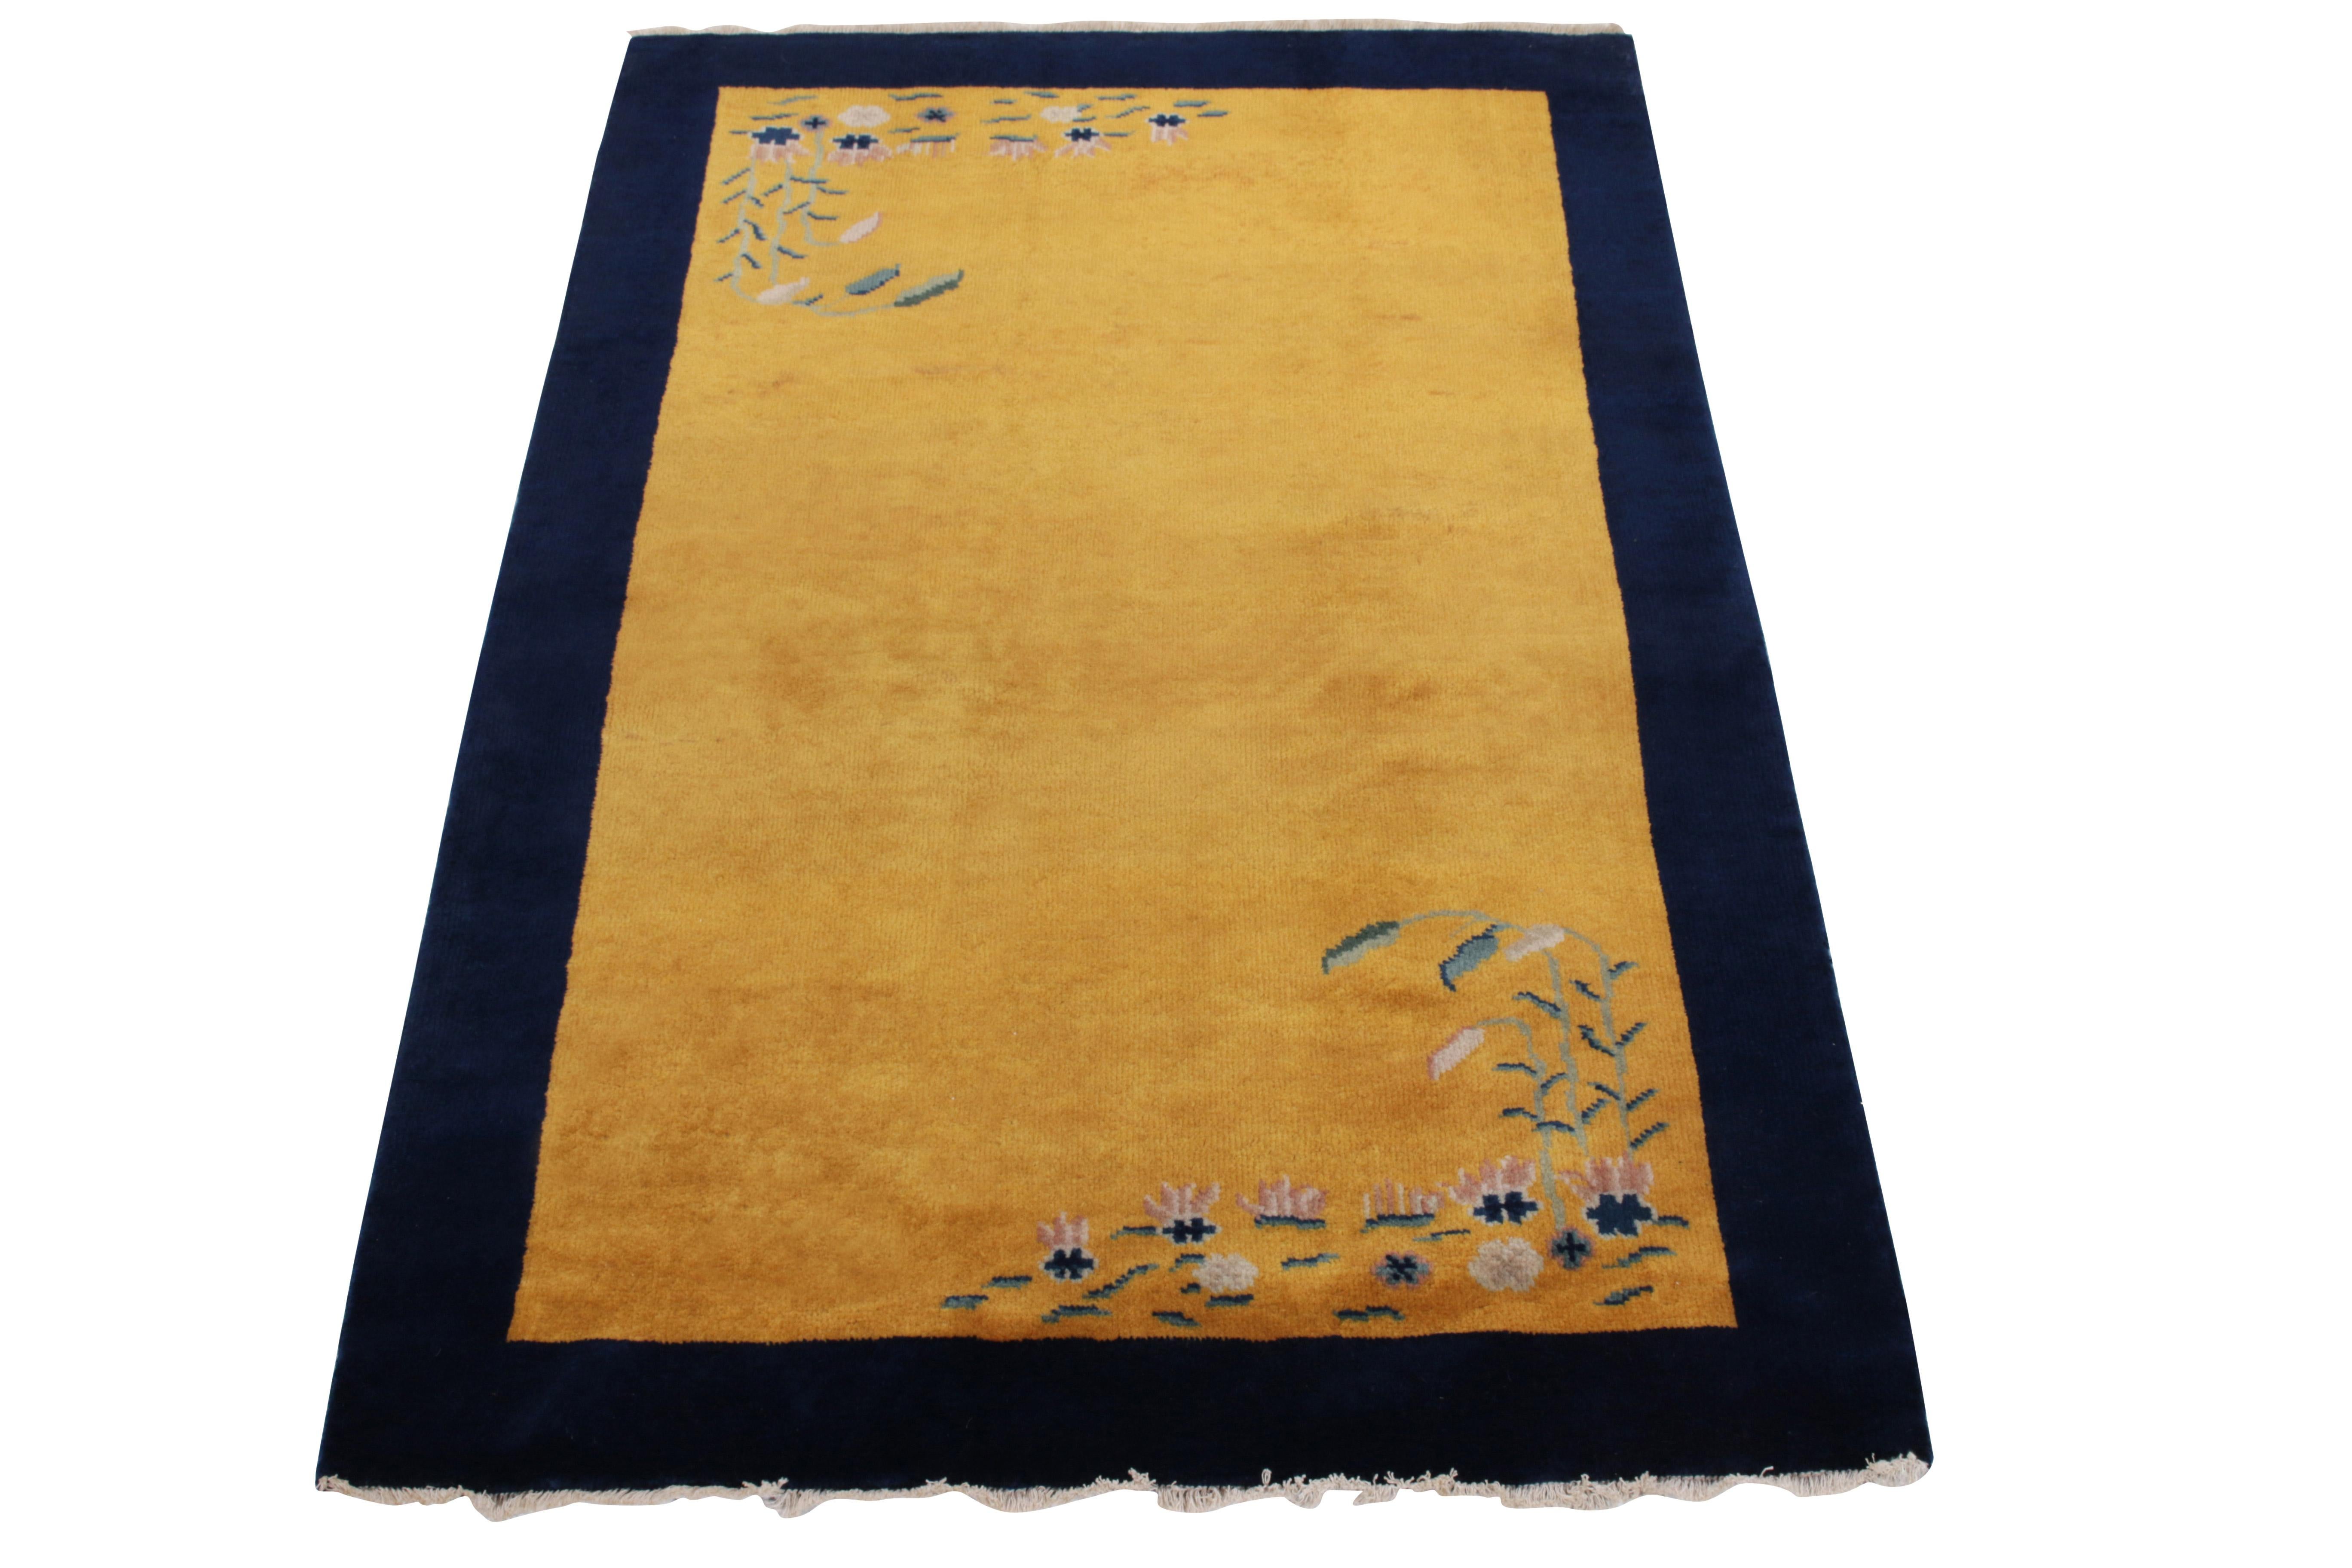 Hand-knotted in wool, a 3 x 5 vintage rug from our Antique & Vintage collection exemplifying the Chinese Deco sensibilities inspired by the 1920s. The floral pattern flourishing in light & dark blue tones with subtle green foliage rests harmoniously